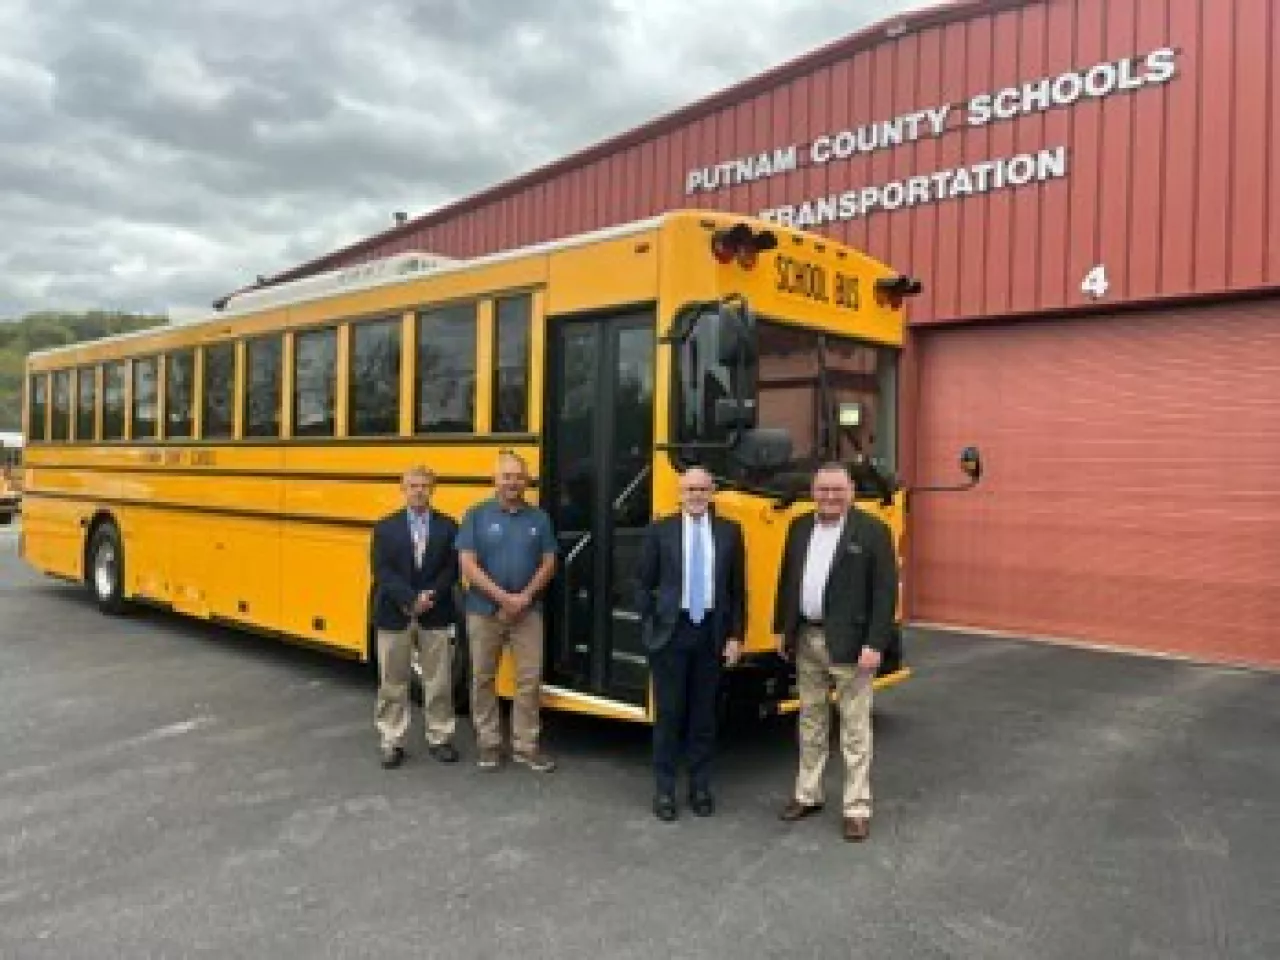 Putnam County Schools taking delivery of a GreenPower BEAST all-electric purpose-built school bus. In the photo are Bruce McGrew, Assistant Superintendent; Pat Clark, Director of Transportation; John Hudson, Superintendent and GreenPower Motor Vice President Mark Nestlen img#2